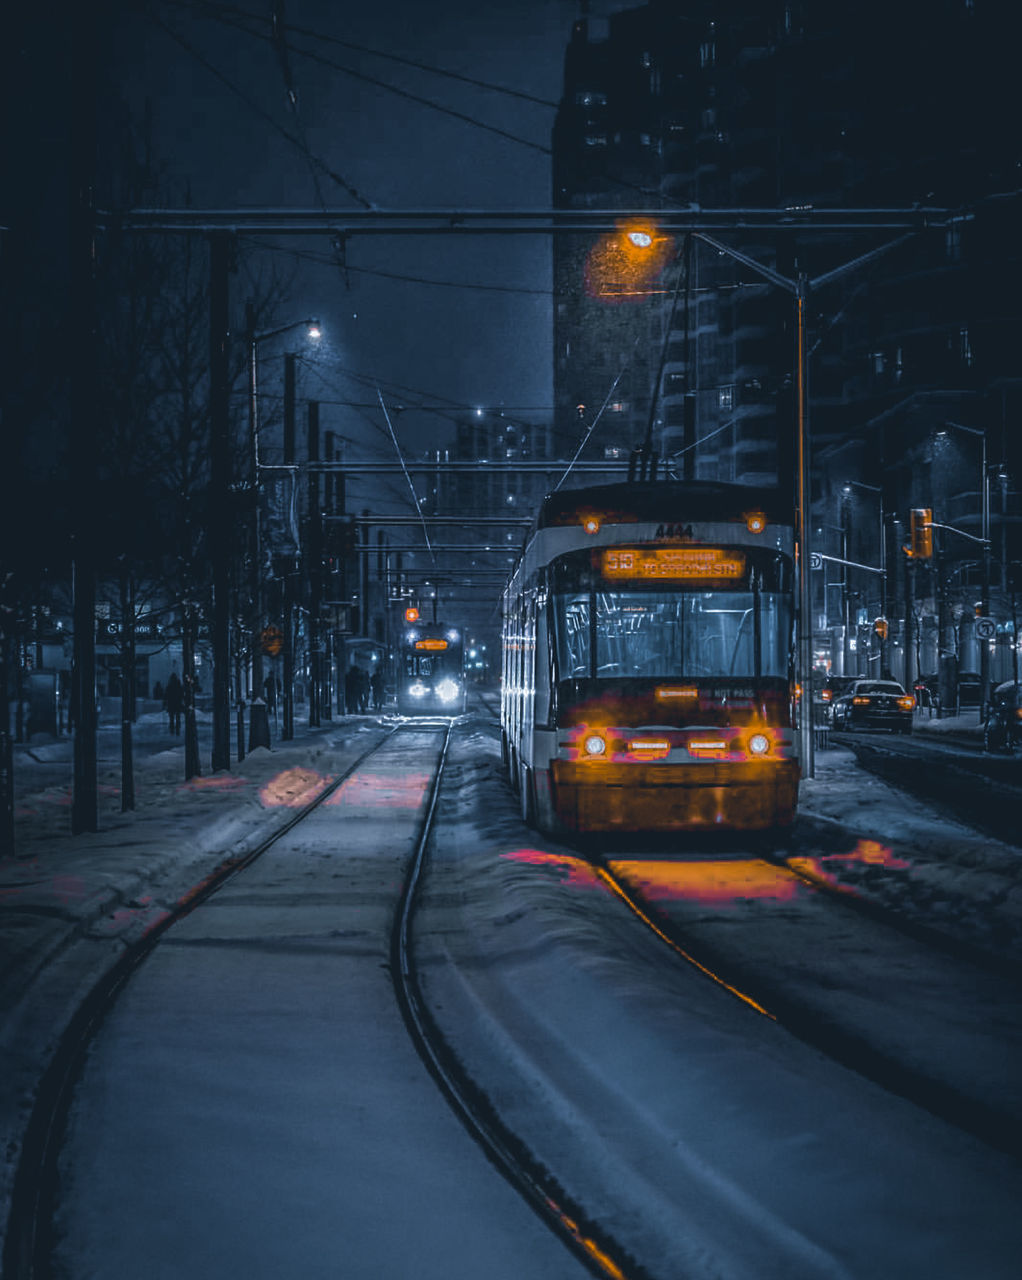 illuminated, transportation, mode of transportation, night, rail transportation, railroad track, track, street, land vehicle, city, architecture, no people, snow, direction, road, cold temperature, cable, the way forward, street light, electricity, snowing